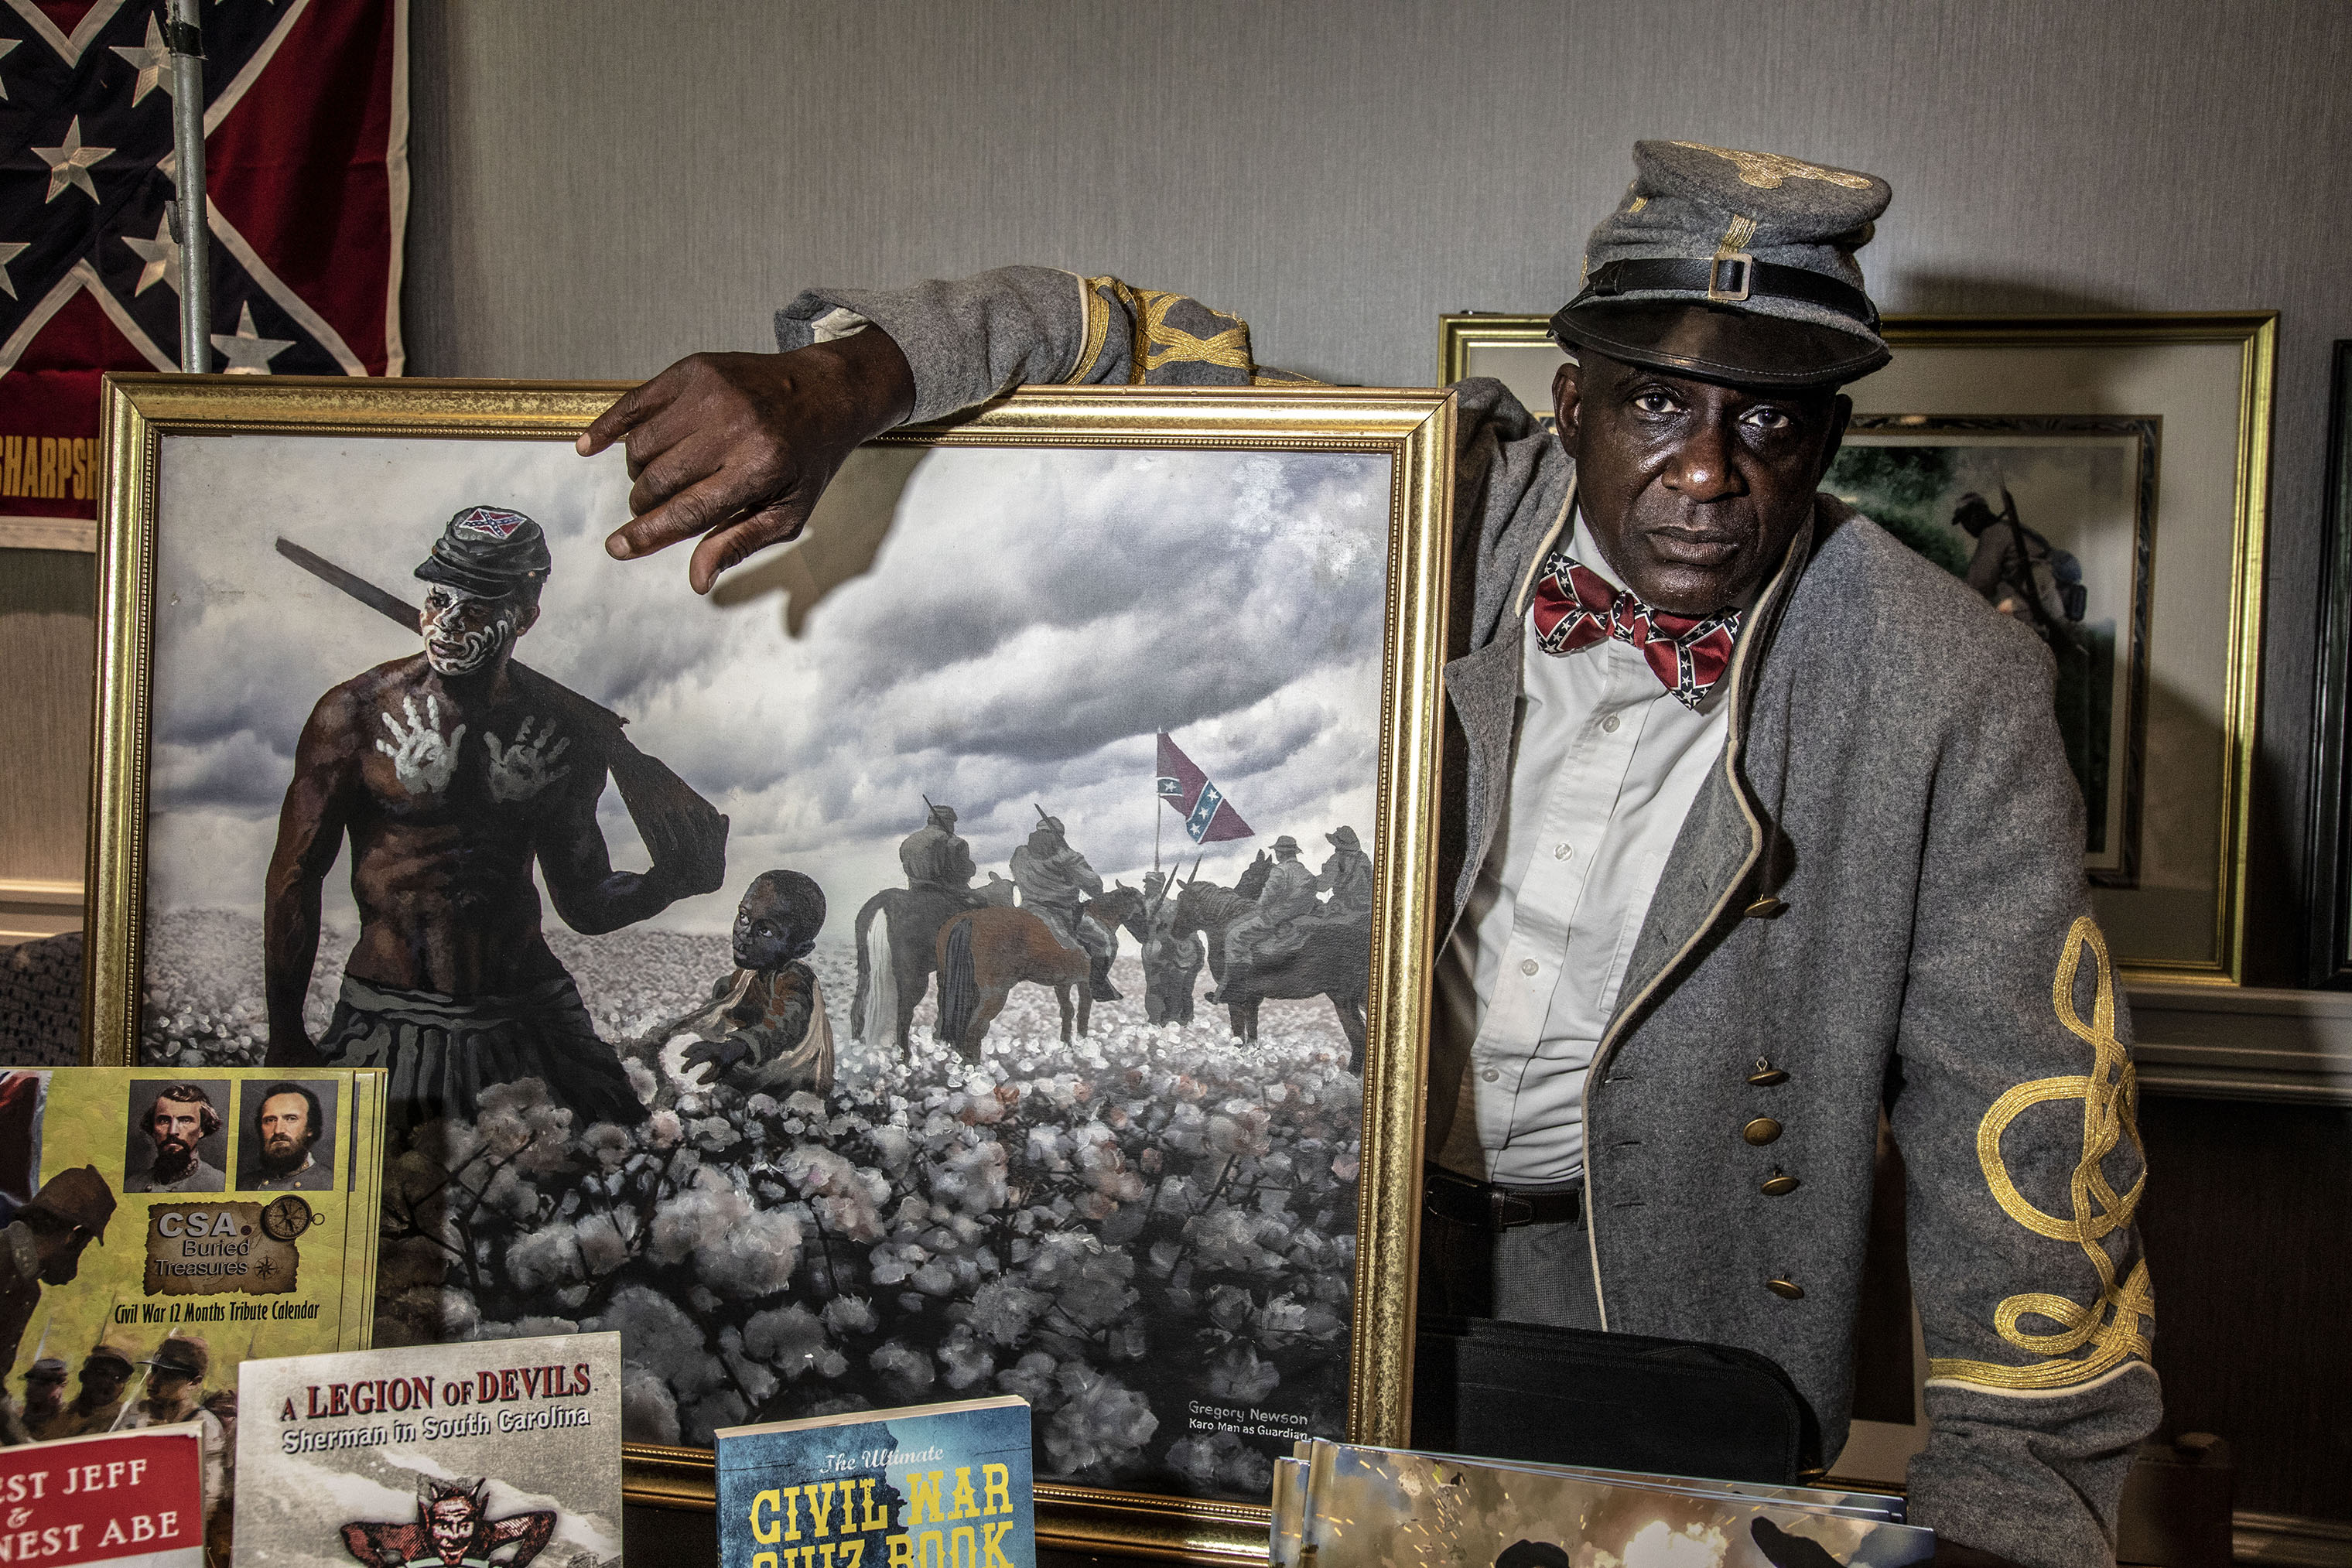 Artist and Confederate supporter Gregory Goodwin Newson at his booth in the vendors area of the Sons of Confederate Veterans national convention. Newson paints pictures of Black Confederate soldiers. (Mark Peterson—Redux for TIME)